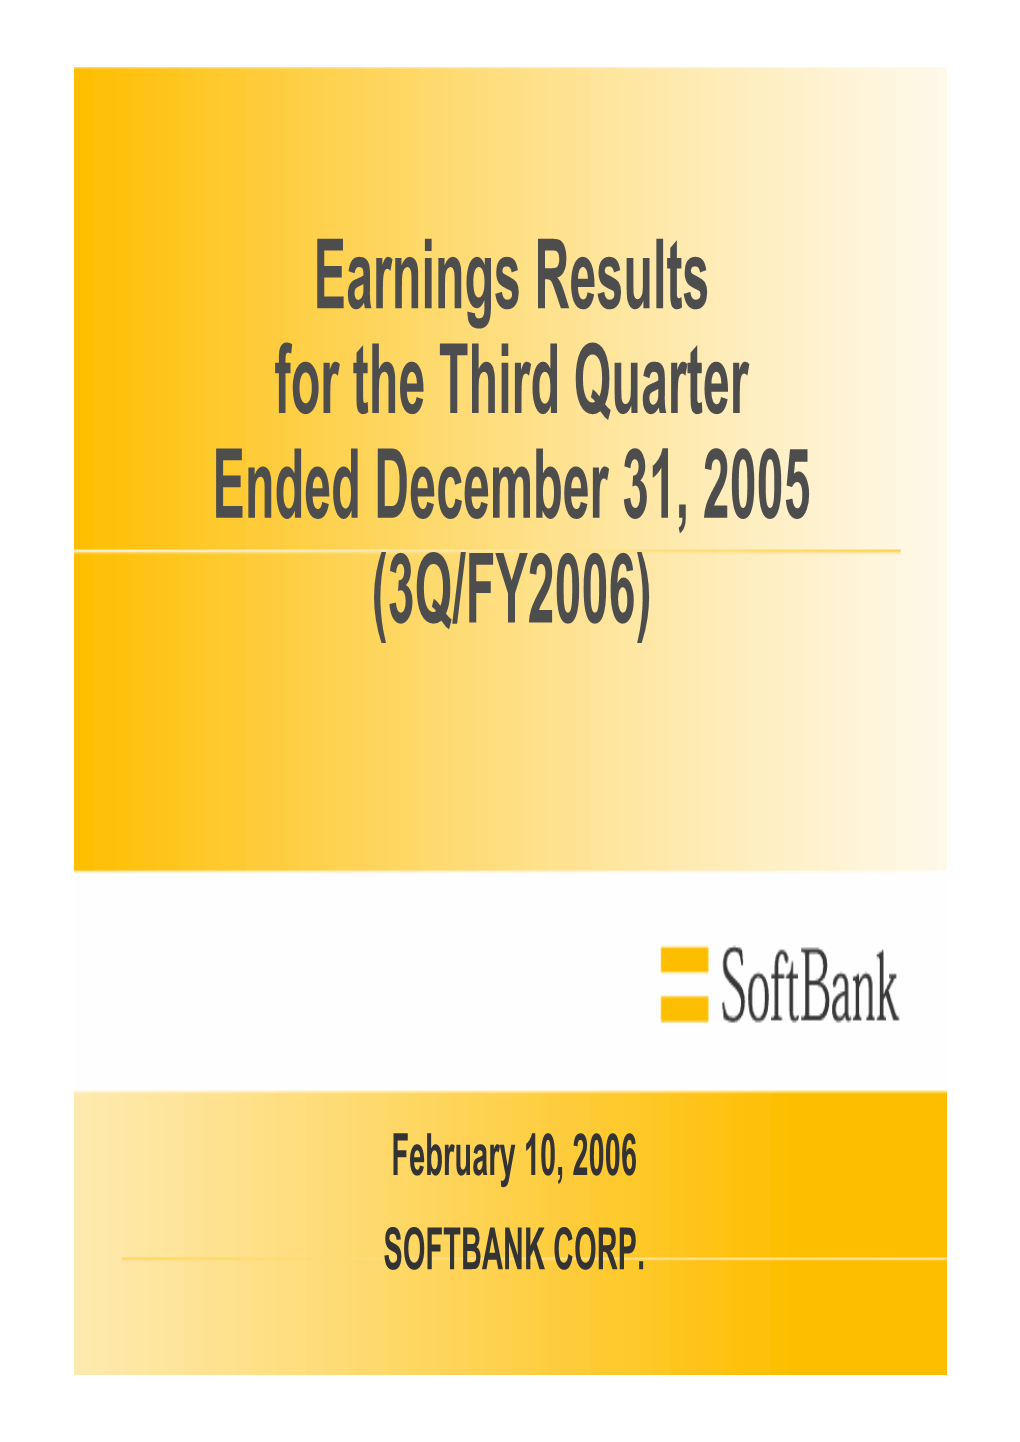 Earnings Results for the Third Quarter Ended December 31, 2005 (3Q/FY2006)